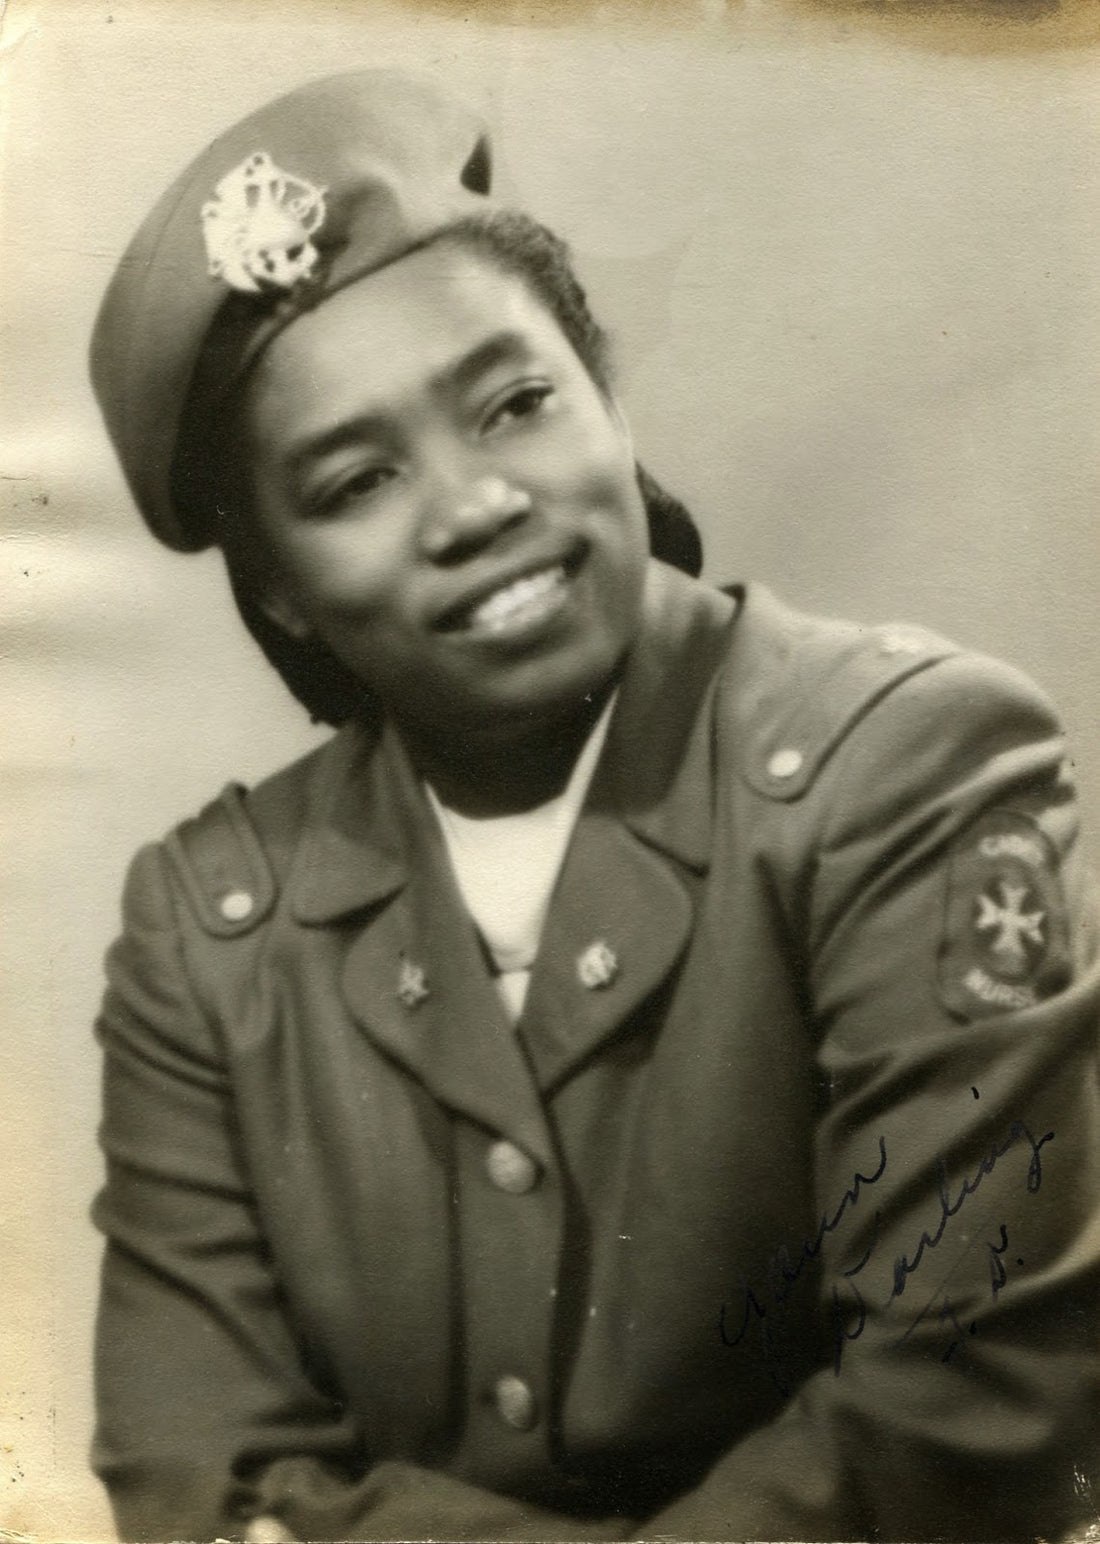 Fact Friday 243 - The First Black Public Health Nurse in Charlotte